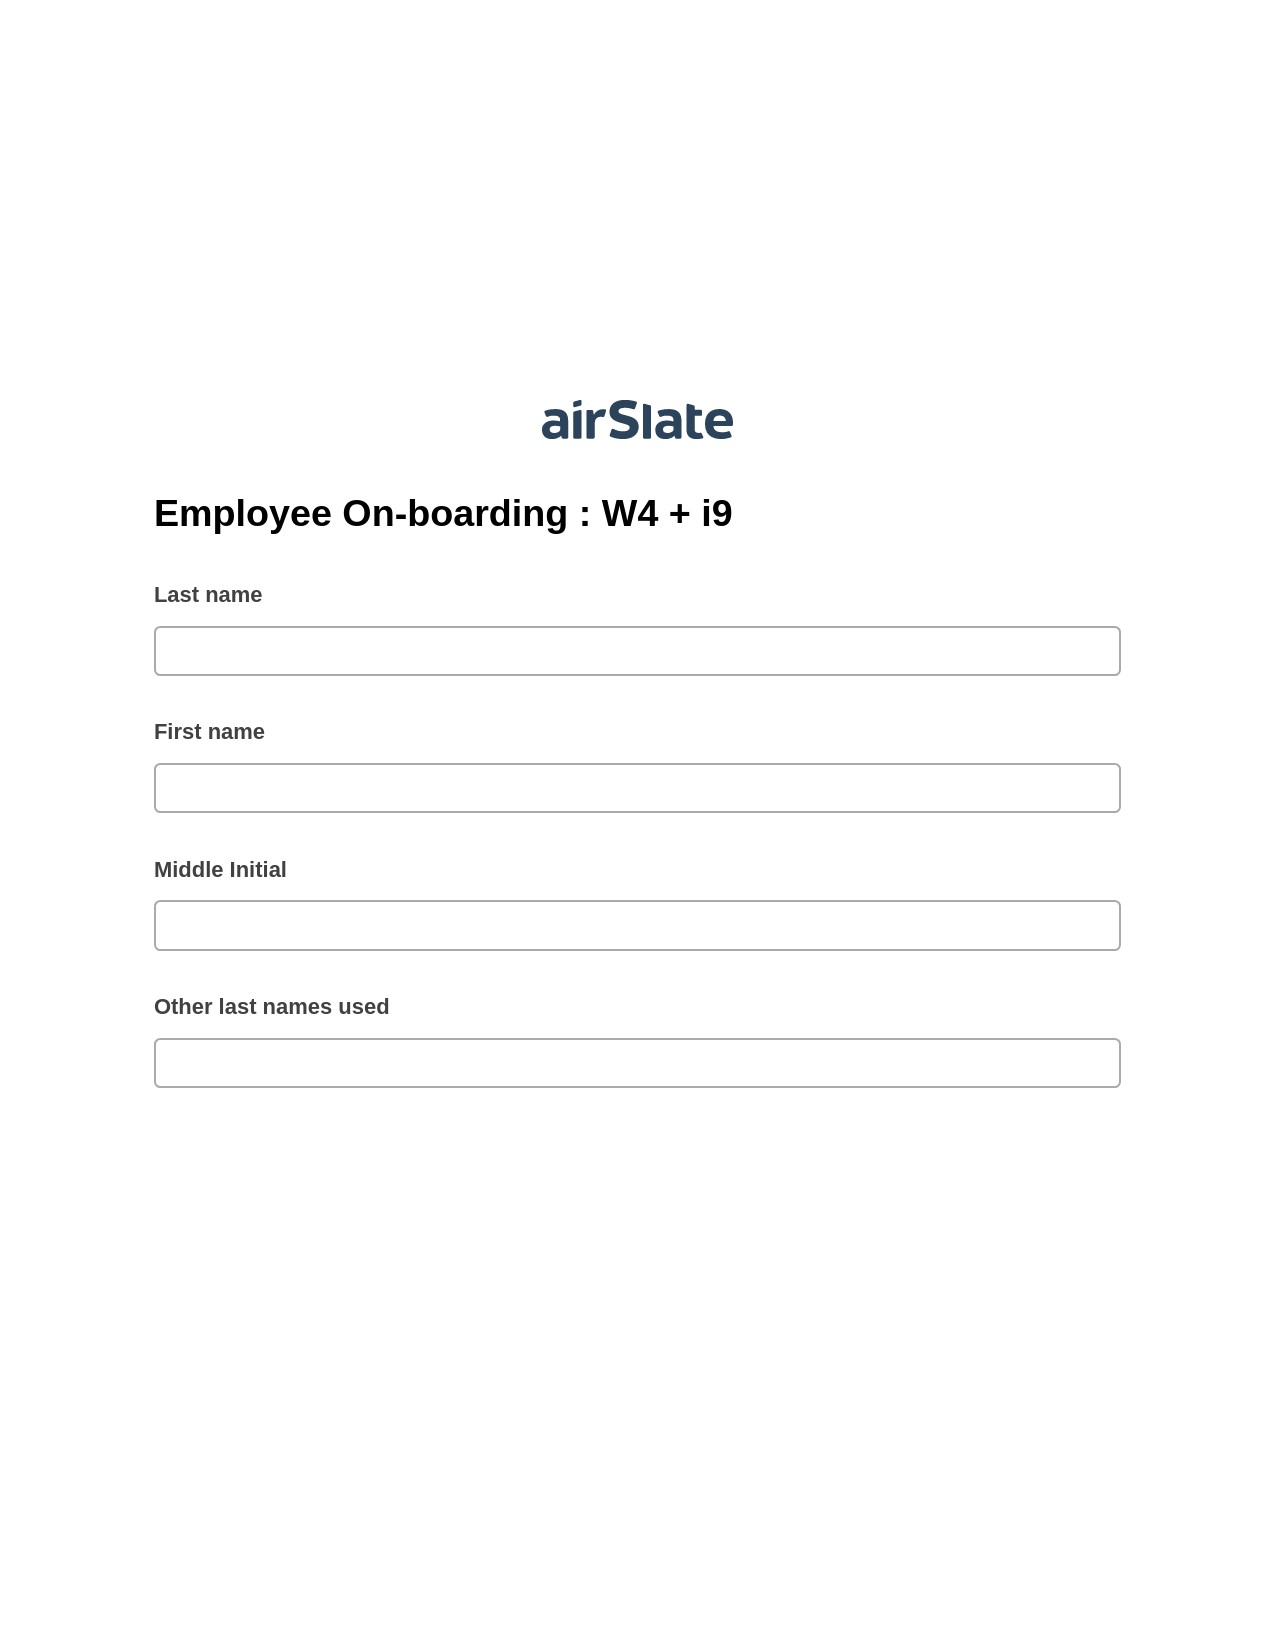 Employee On-boarding : W4 + i9 Pre-fill from another Slate Bot, Assign Slate Name Bot, Post-finish Document Bot